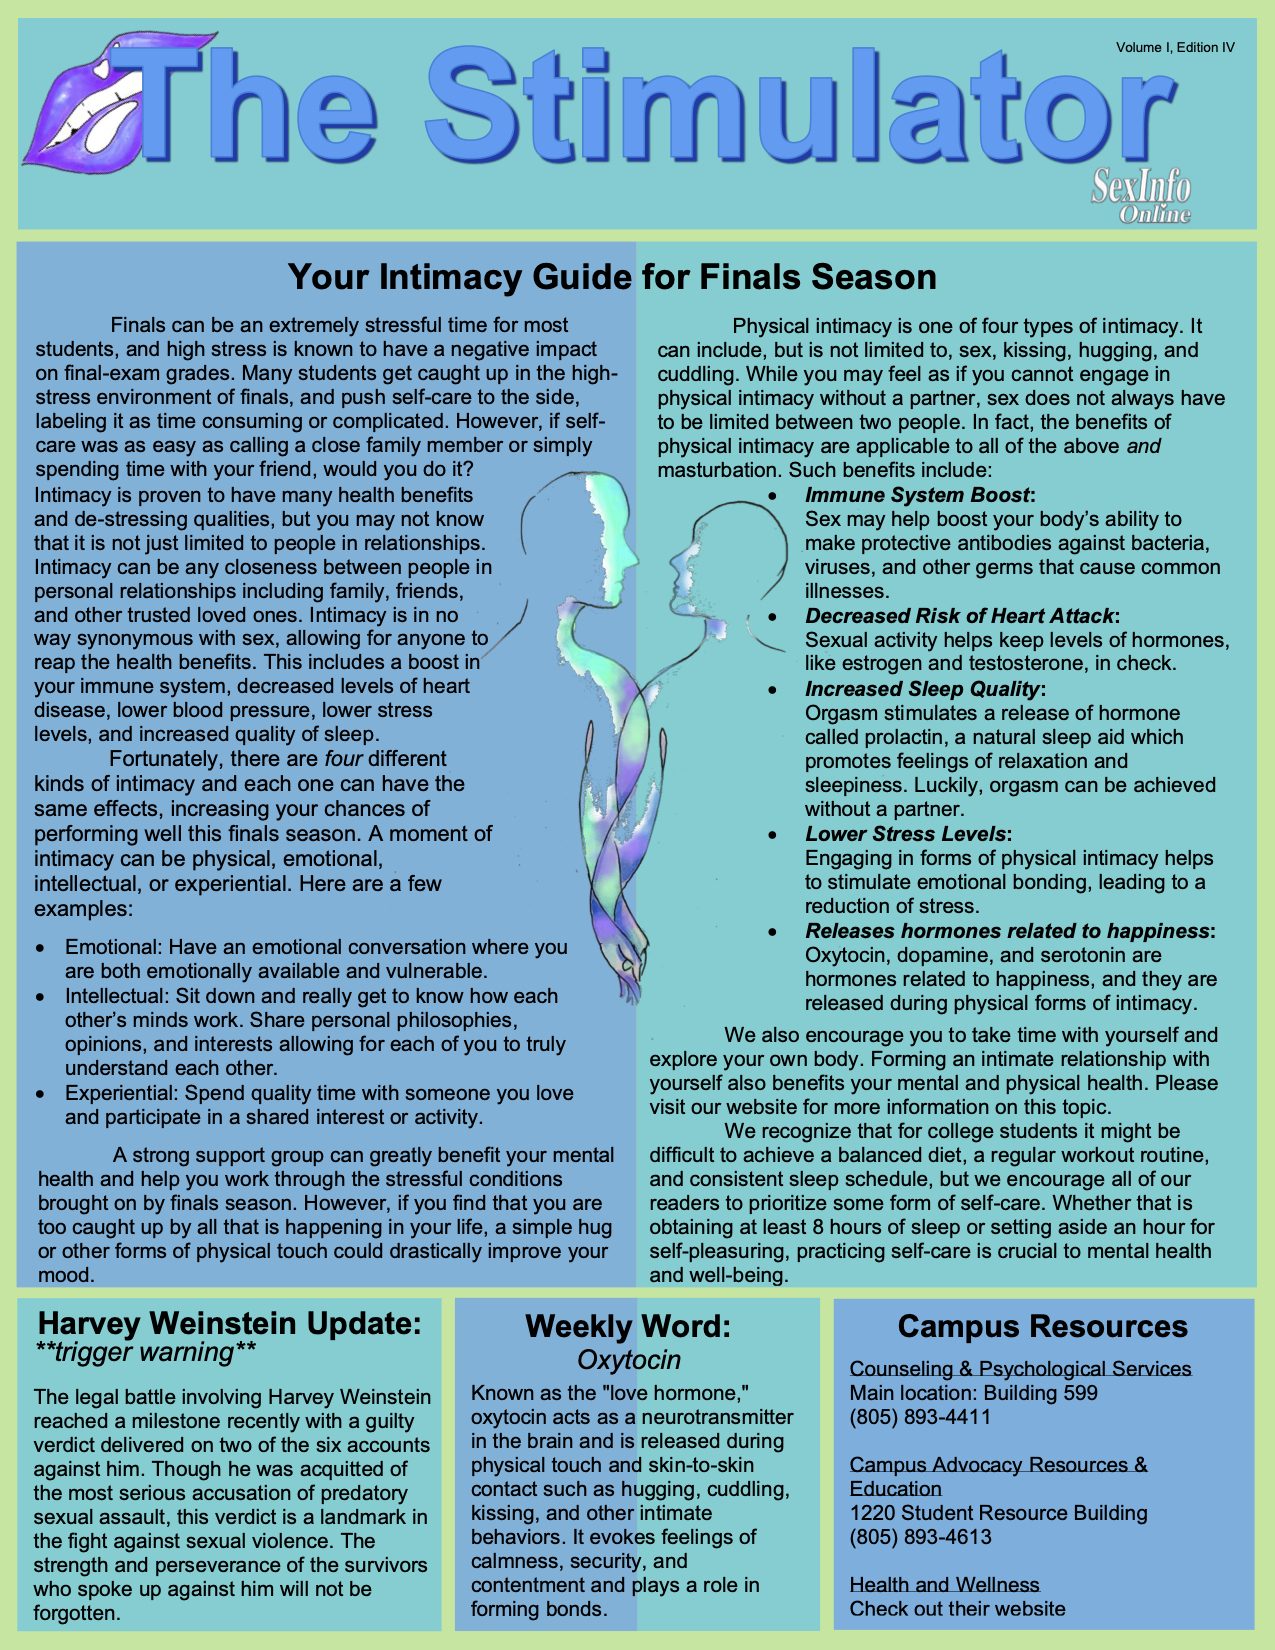 Quick Guide to Intimacy